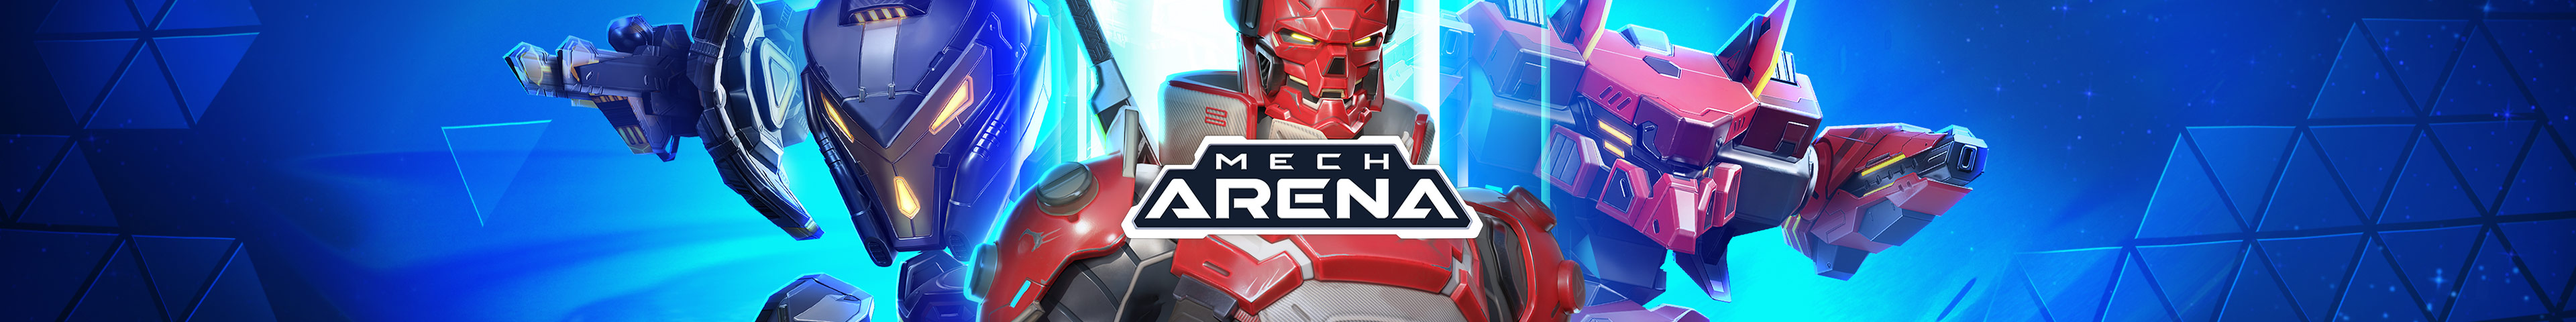 FAQ about cheaters in Mech Arena 